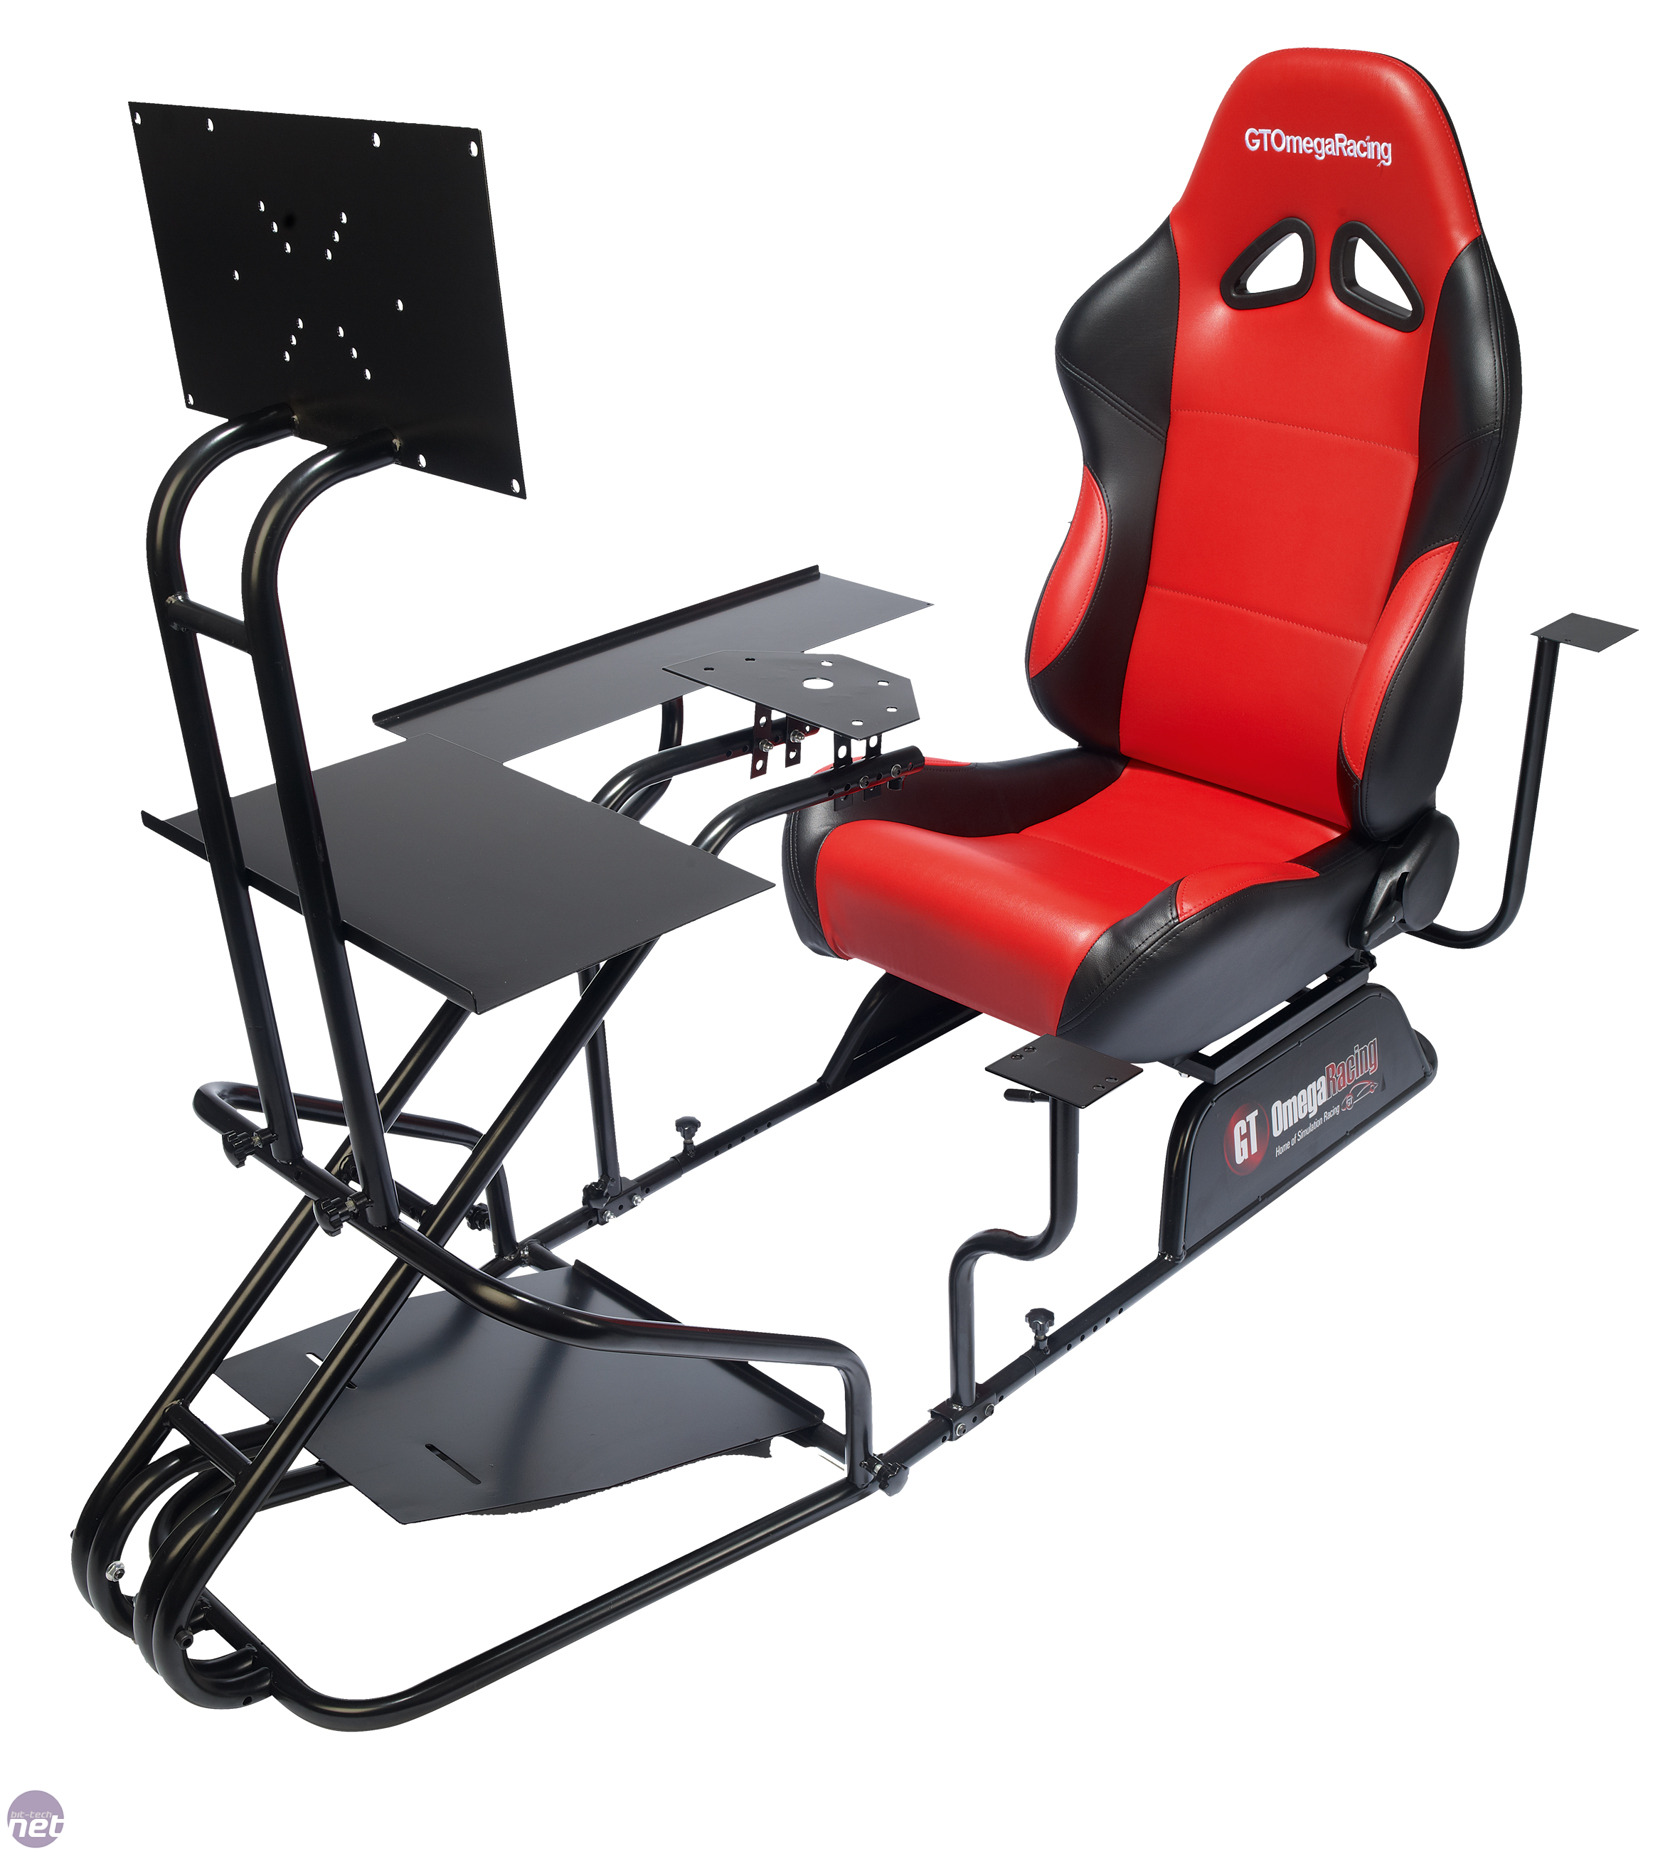 gt omega pro gaming chair